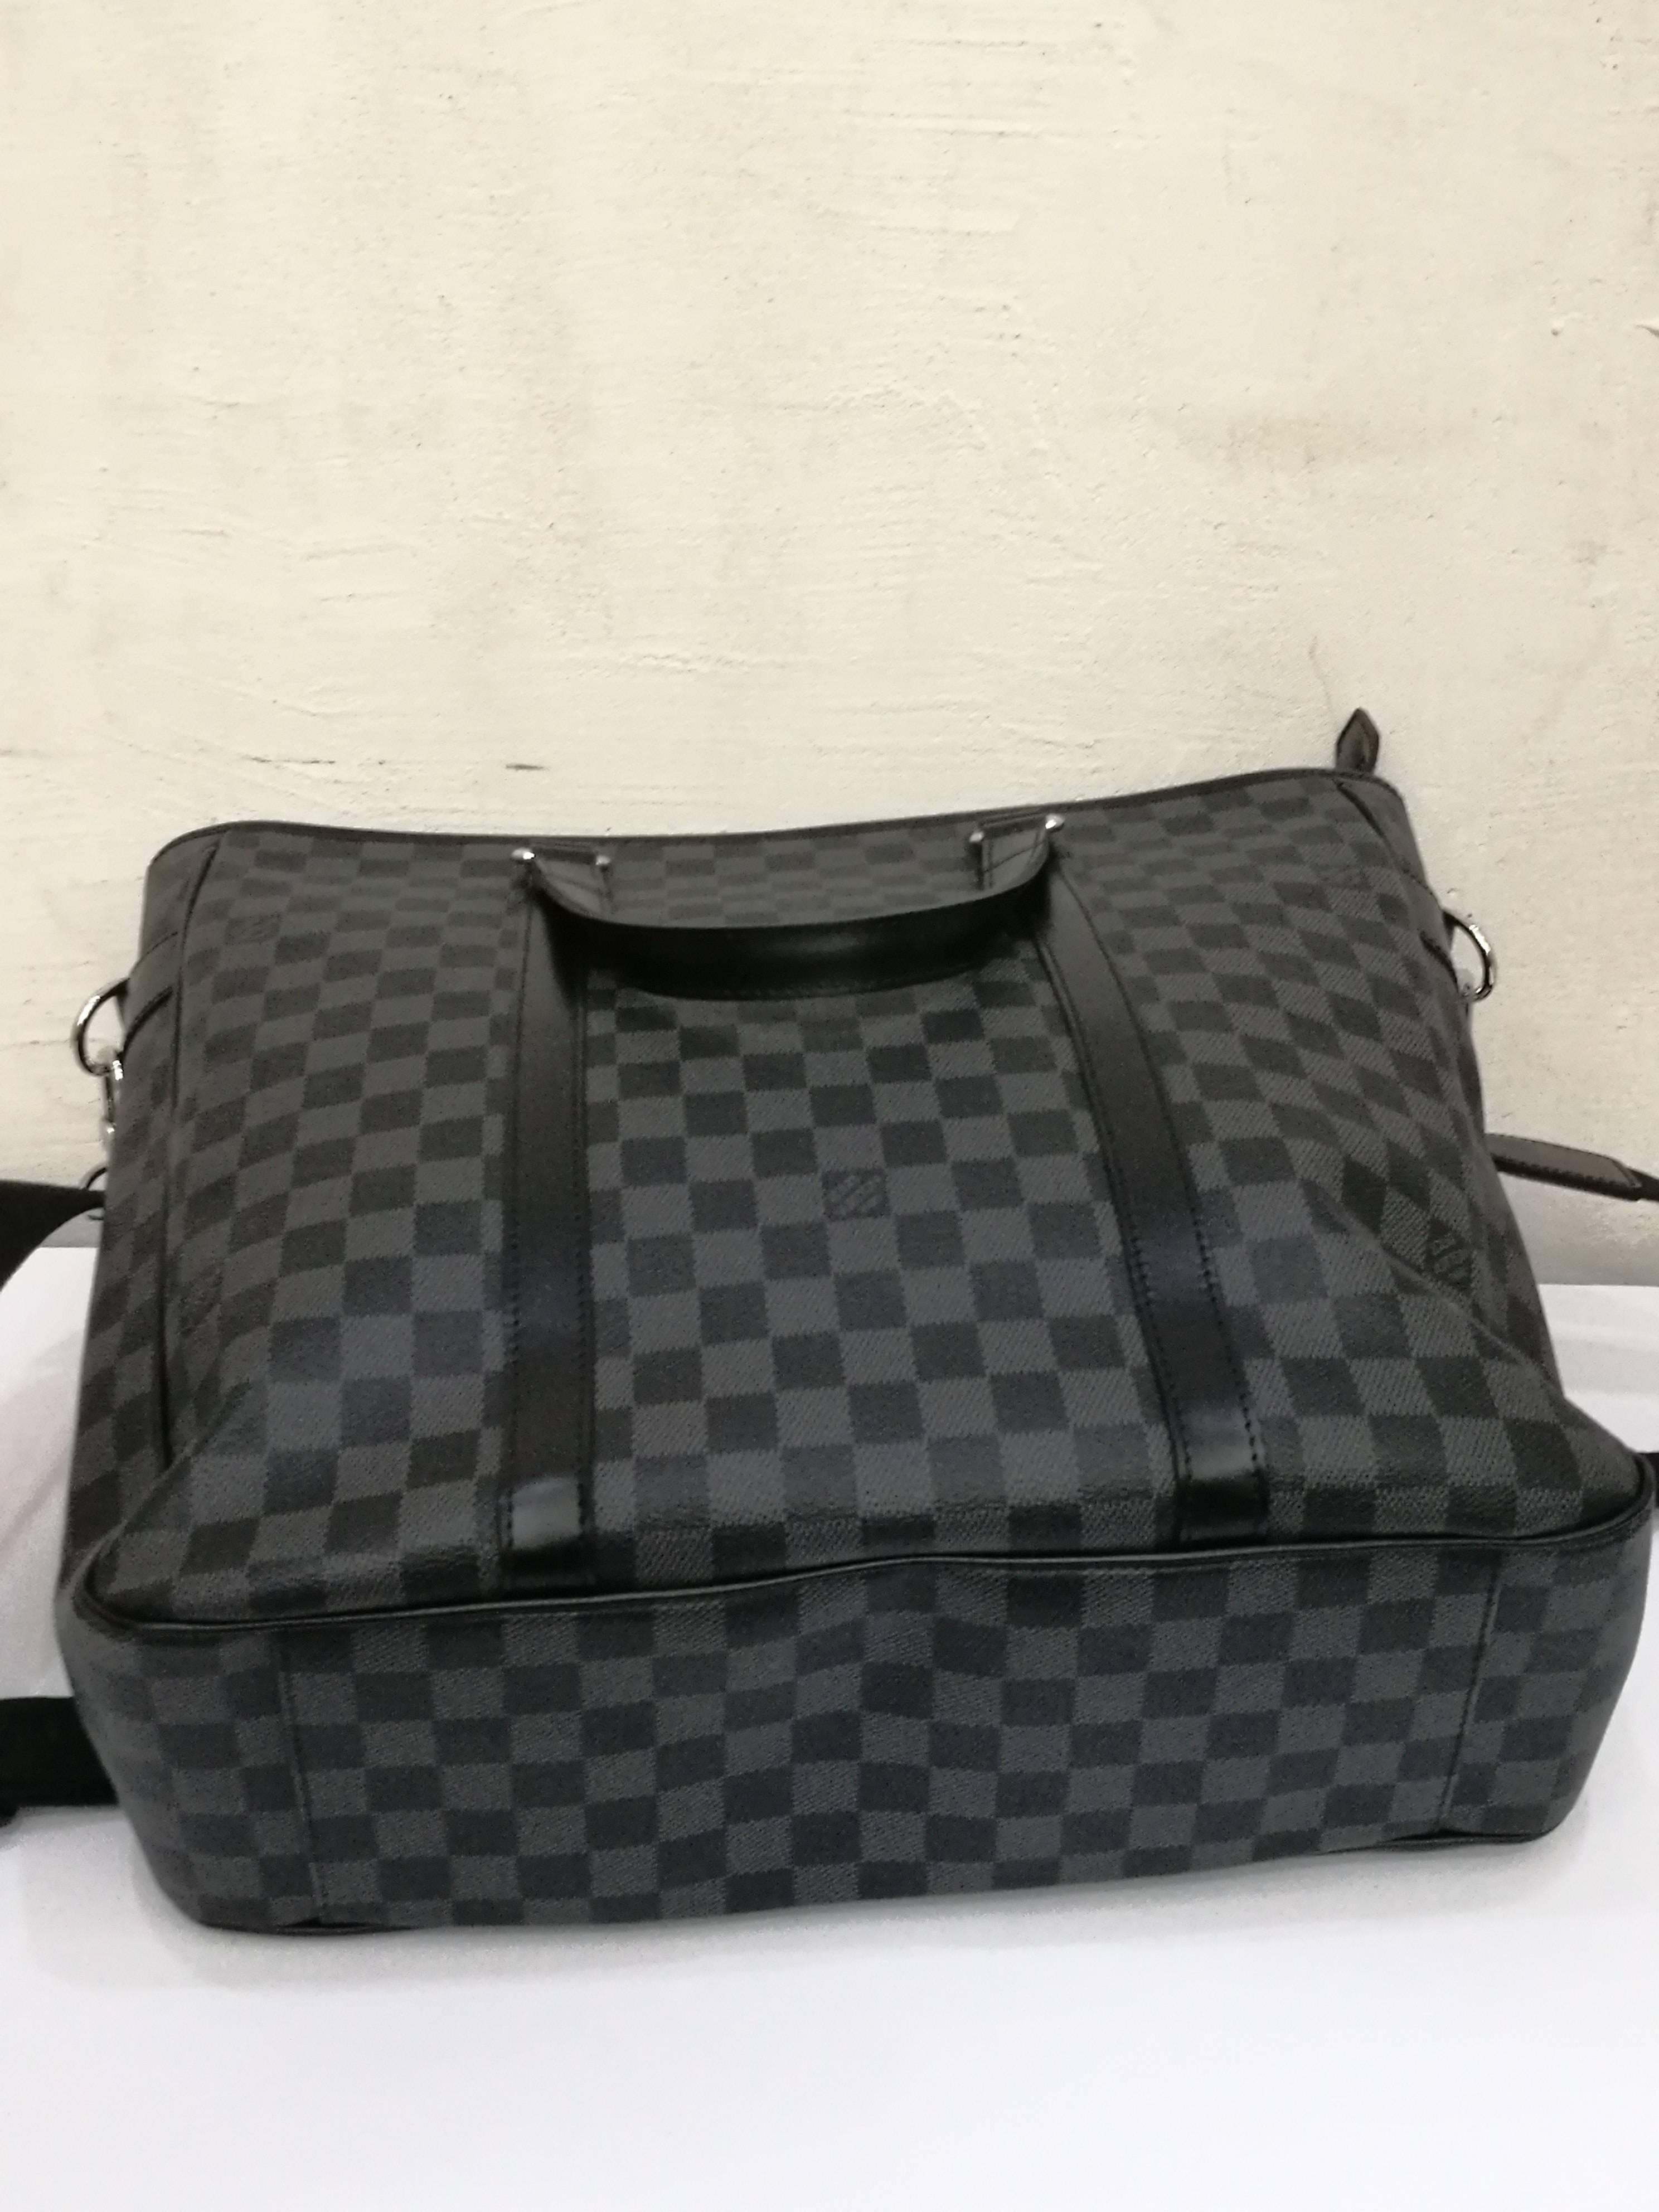 LOUIS VUITTON Damier Graphite Tadao
This stylish cross-body bag is crafted of Louis Vuitton signature damier checked toile canvas. The bag features a nylon adjustable cross-body strap with silver hardware and rolled leather top handles with silver